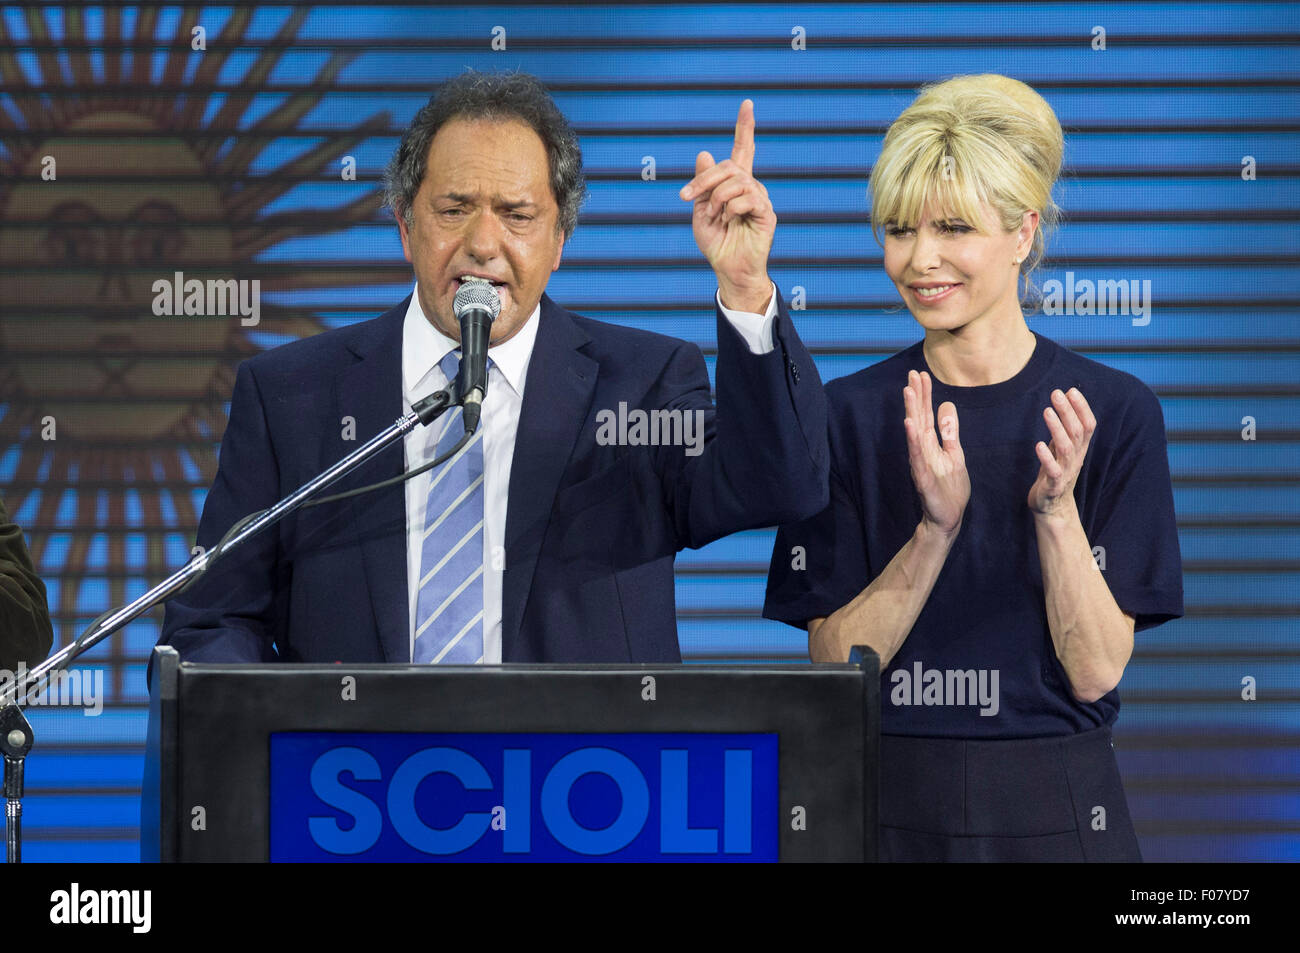 Buenos Aires, Argintina. 10th Aug, 2015. The presidential candidate to Argentina's Presidency of ruling party "Frente para la Victoria" (Front for Victory), Daniel Scioli (L), speaks along with his wife Karina Rabolini (R), at the campaign bunker, in Buenos Aires city, Argentina, early Aug 10, 2015. Scioli received most votes in the national primary elections in Buenos Aires on Sunday, ahead the general elections to be held on October 25th. Credit:  Xinhua/Alamy Live News Stock Photo